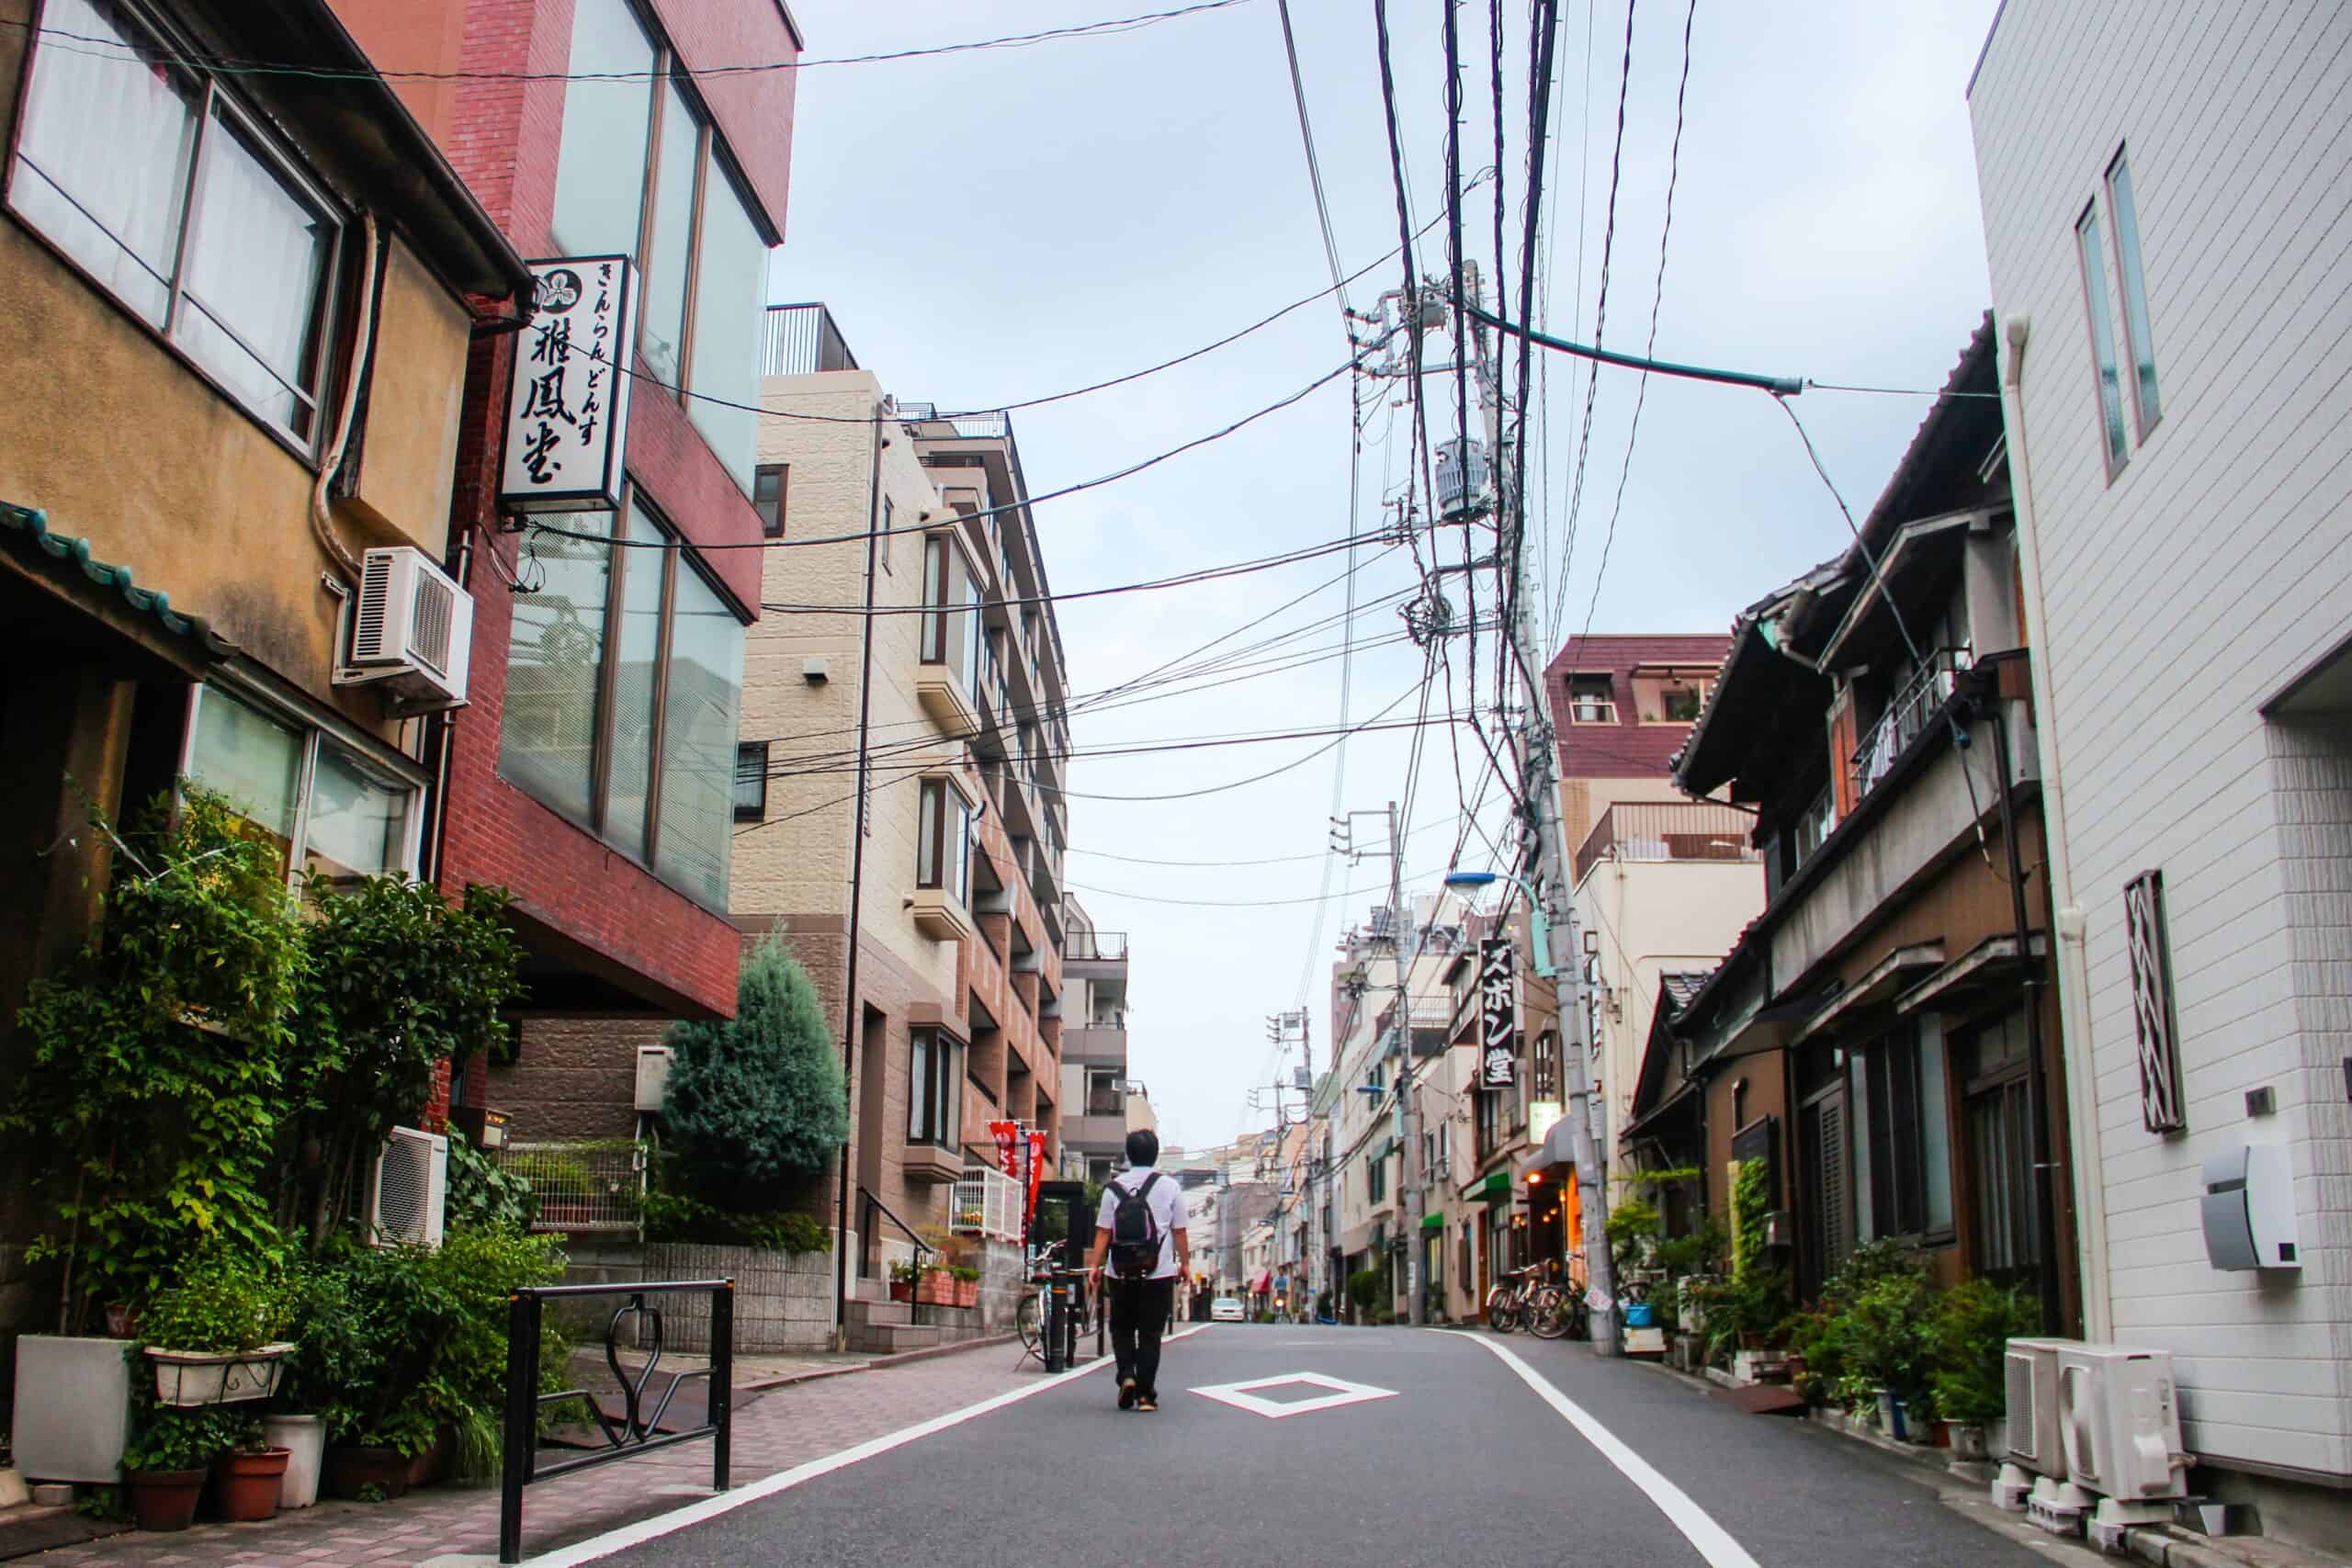 A man walks down a residential street of Tokyo, Japan with neat, compact box design buildings.